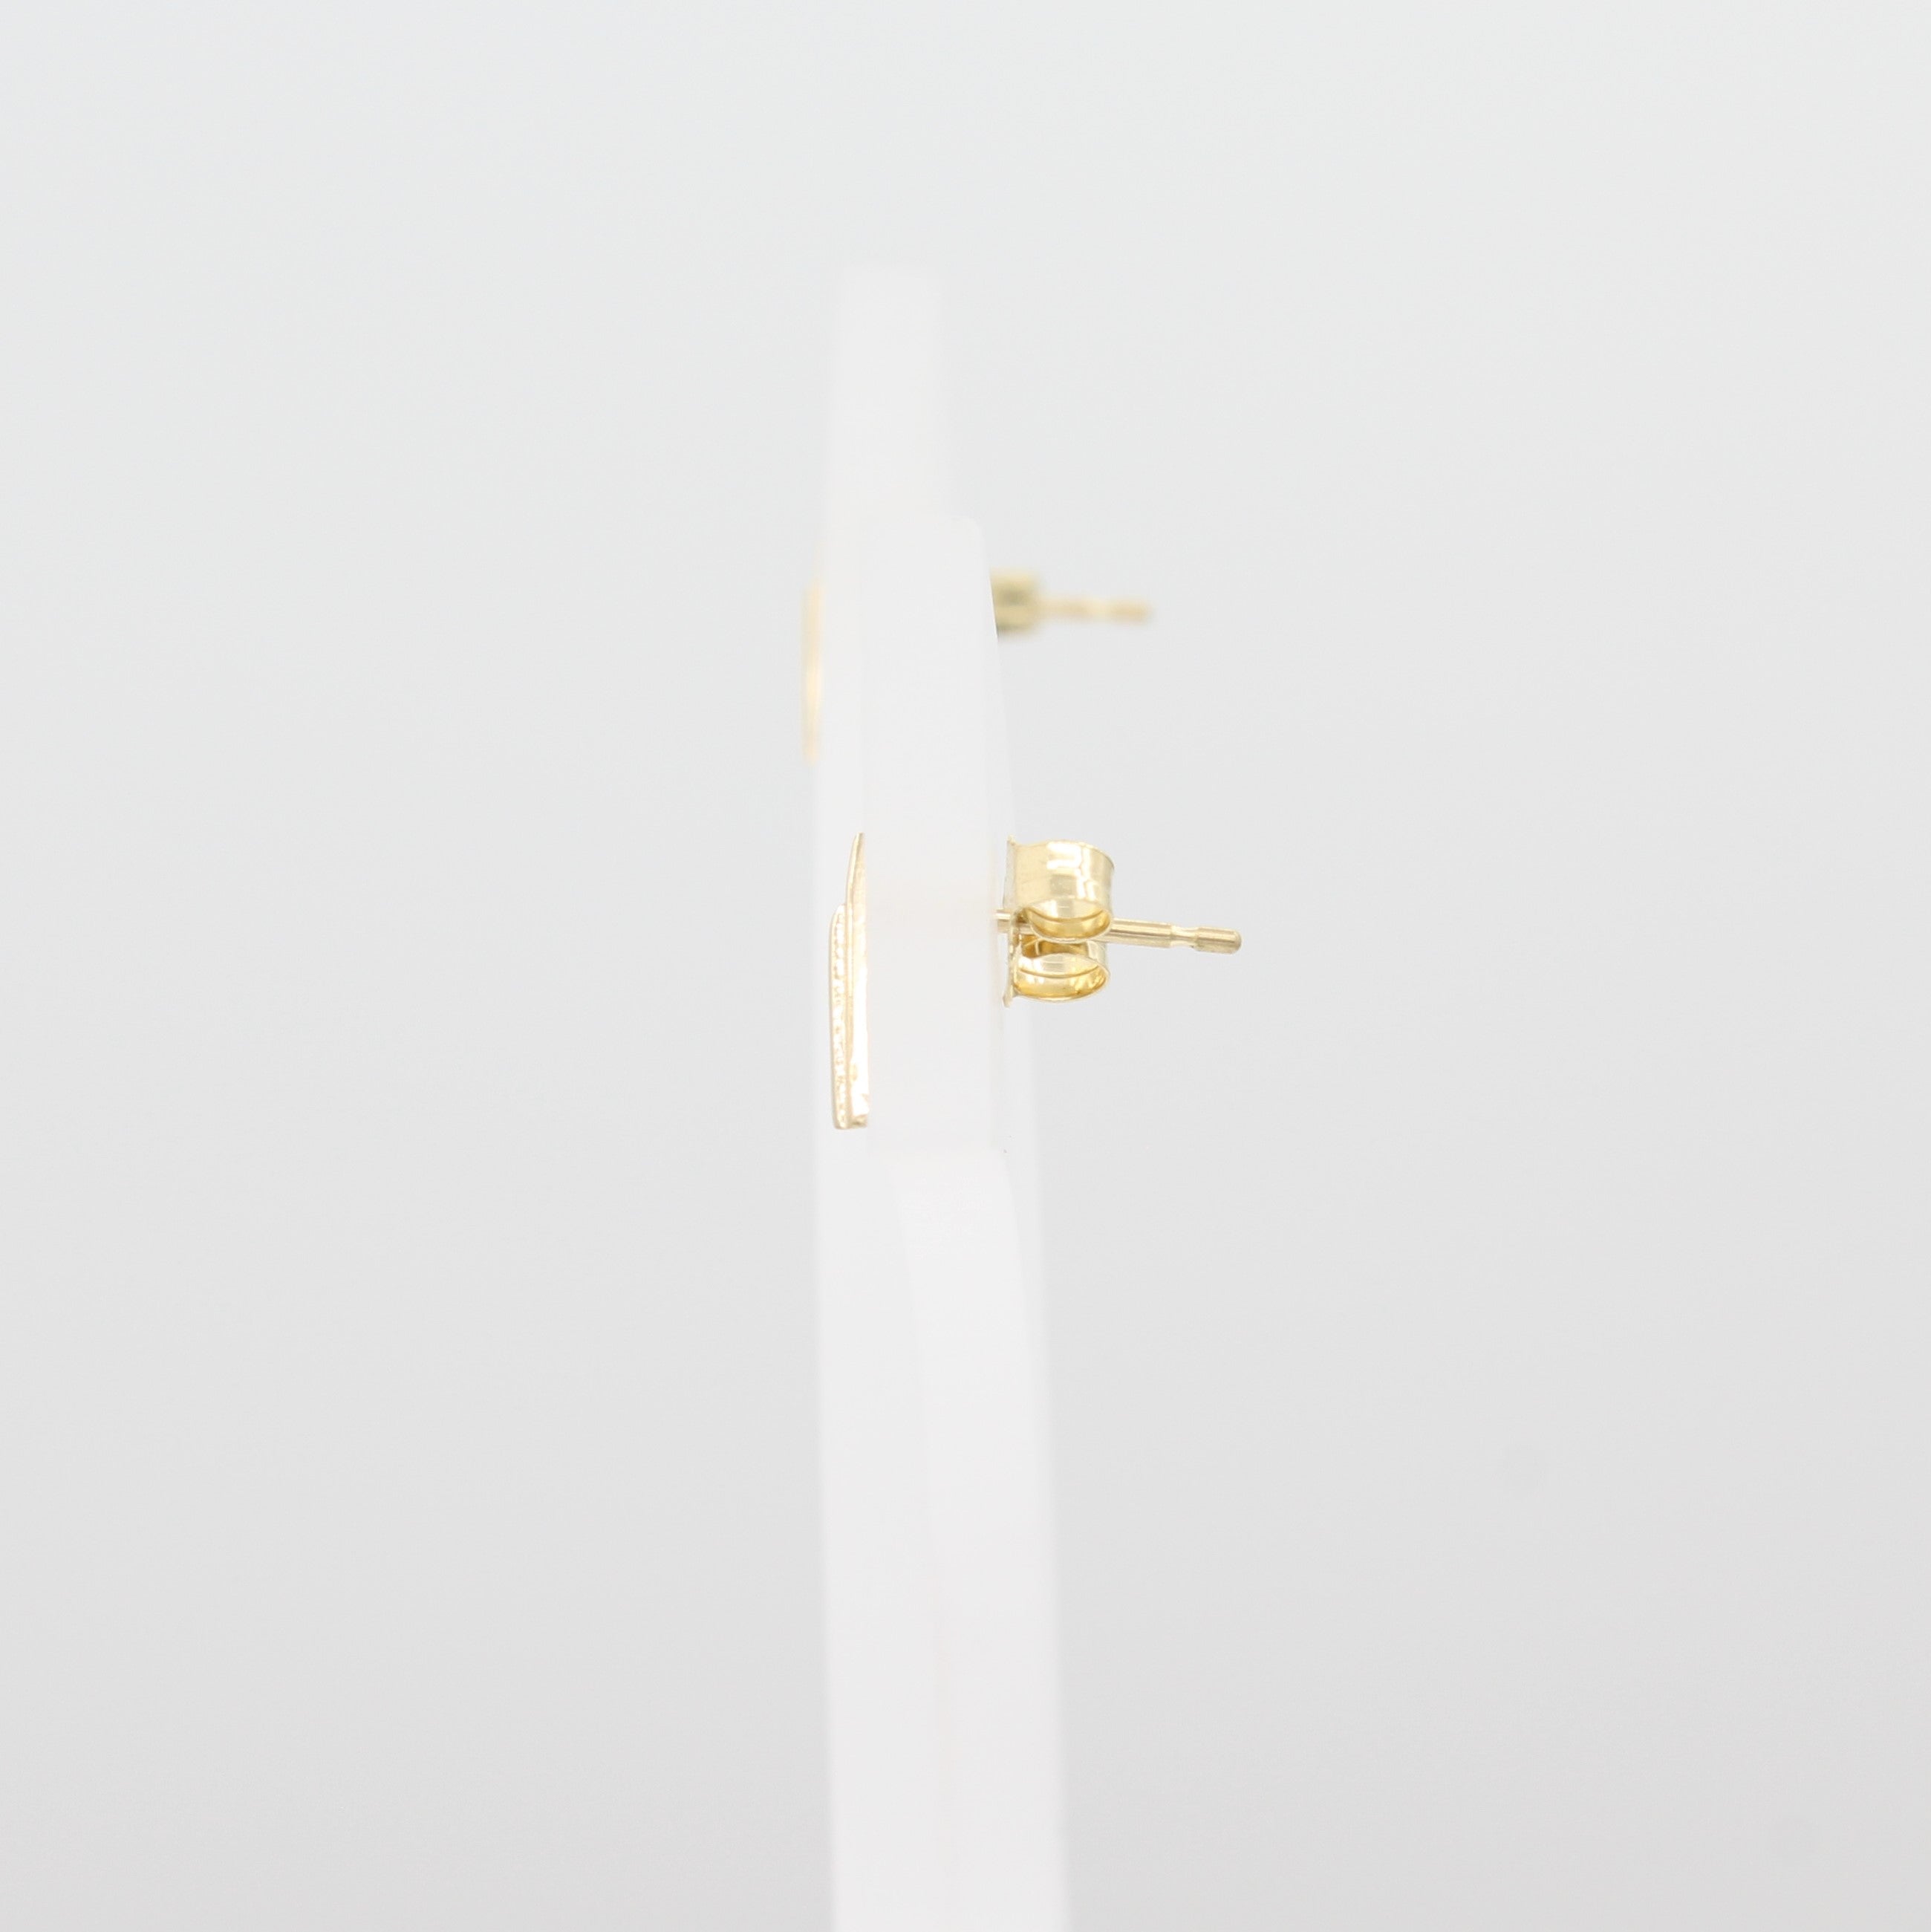 A close-up side view from the right of 14k Yellow Gold Double Chevron Earrings on a white jewelry display with a peak of the earring backs. 